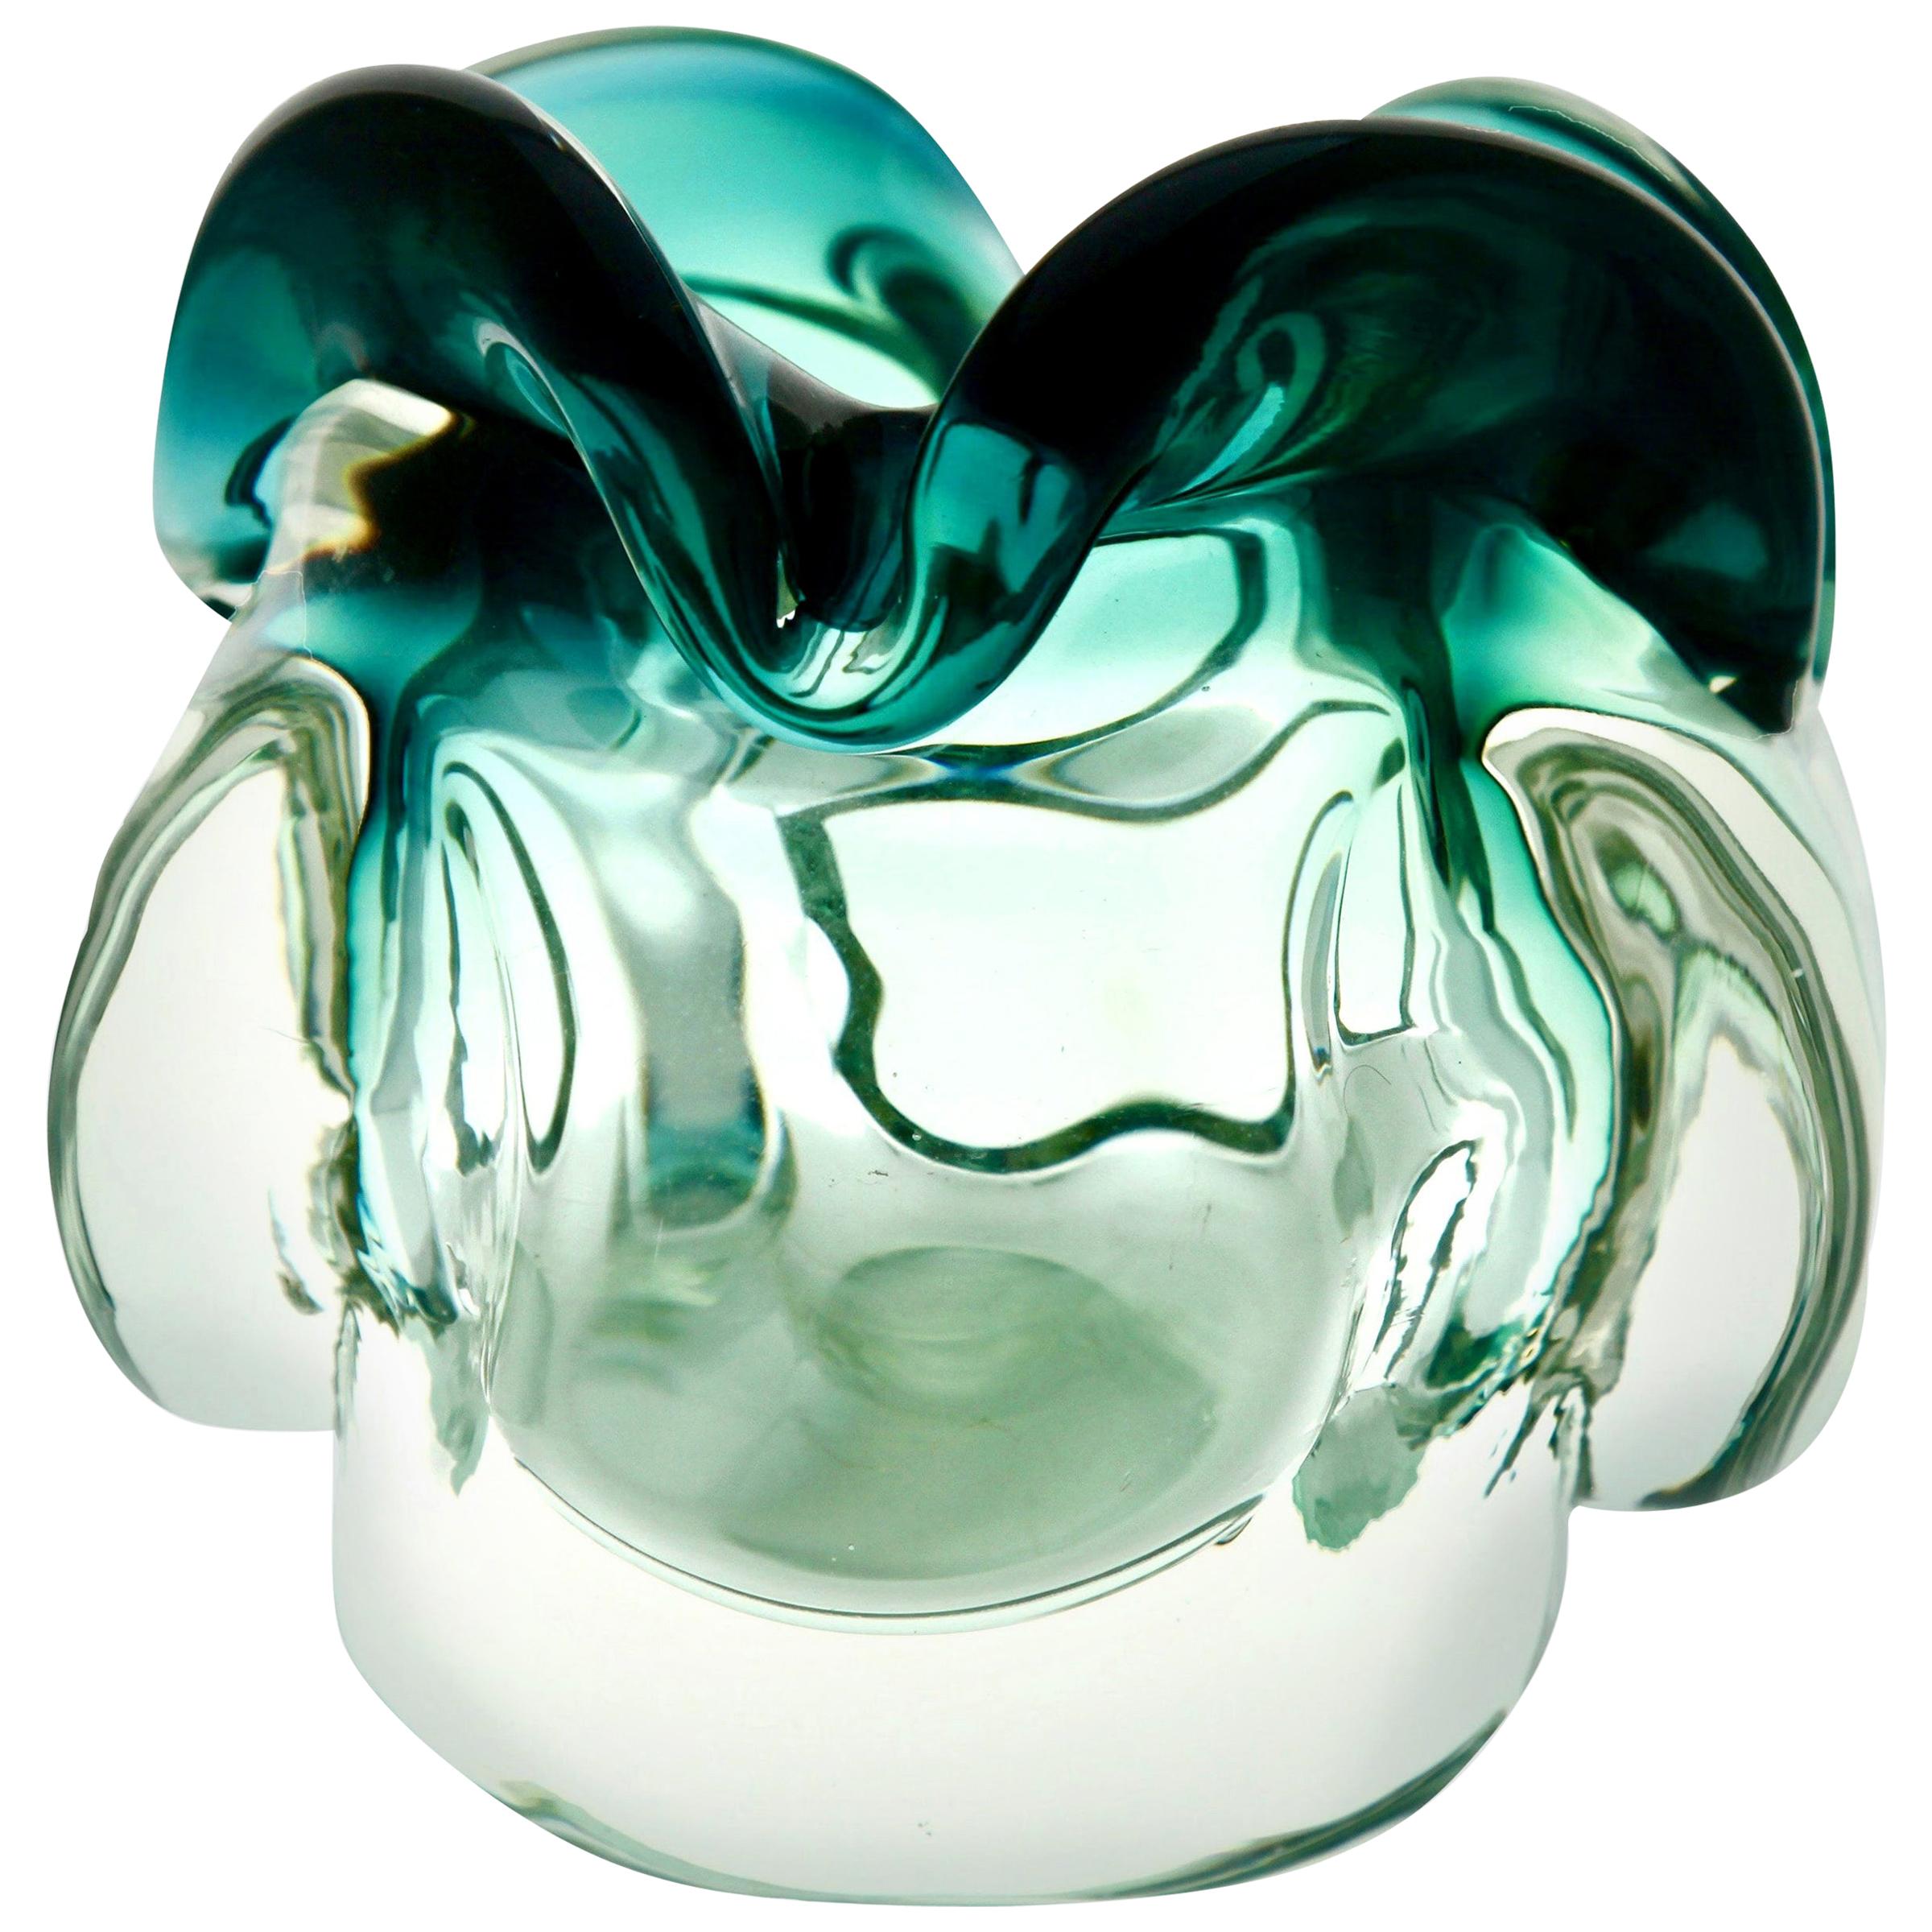 Solid Crystal Biomorphic Bowl with Waves of Green and Sommerso